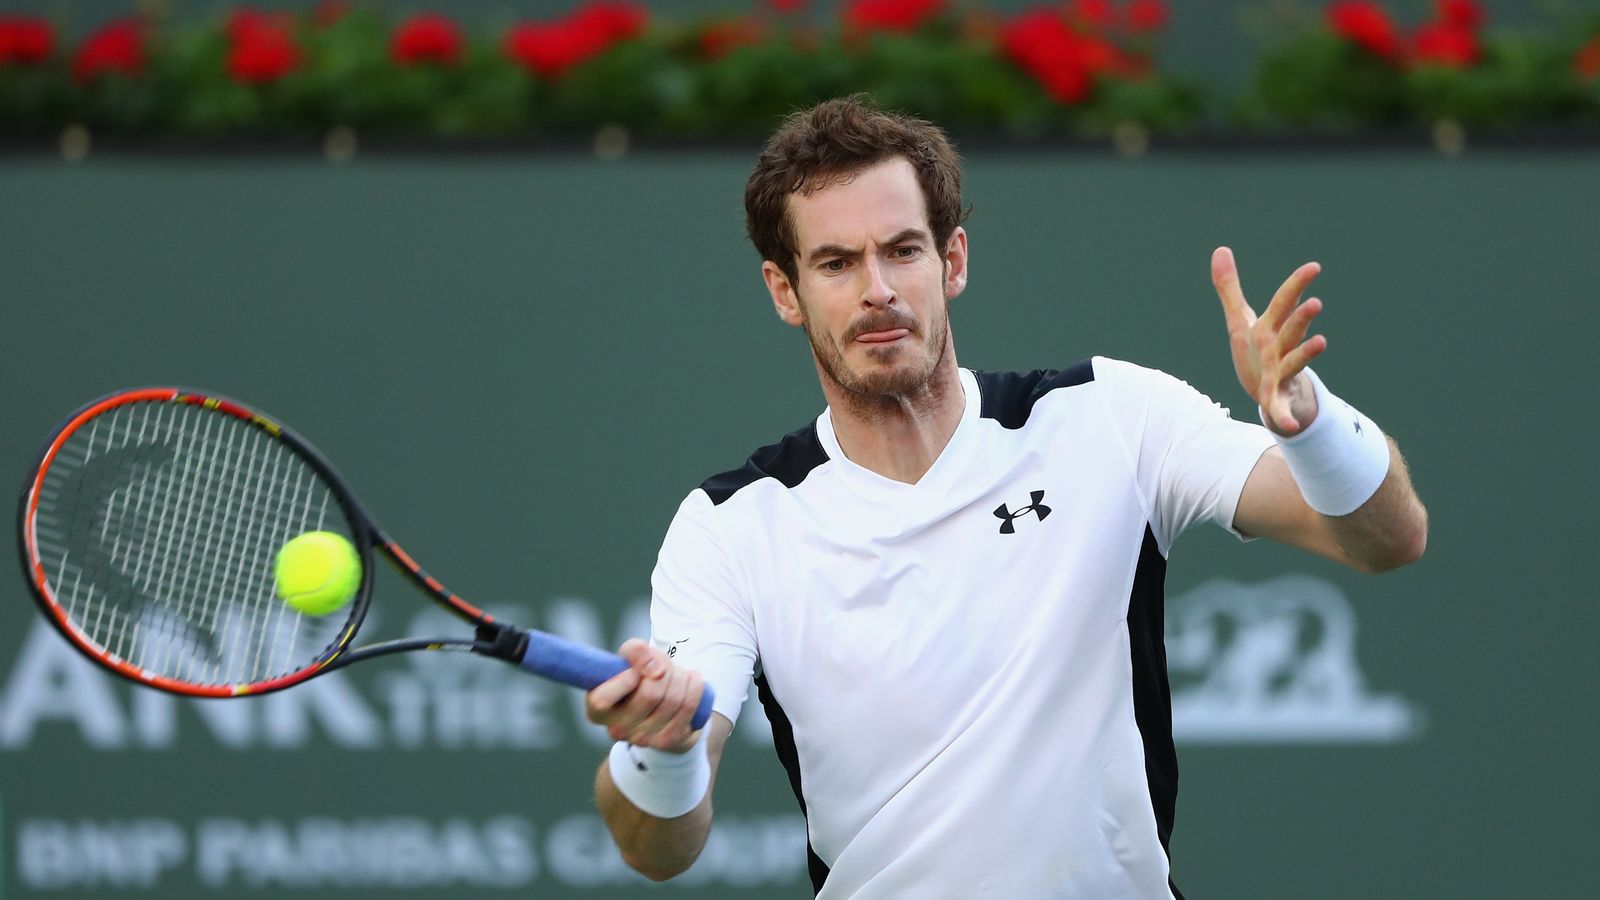 Andy Murray Says Female Tennis Players Should Get Equal